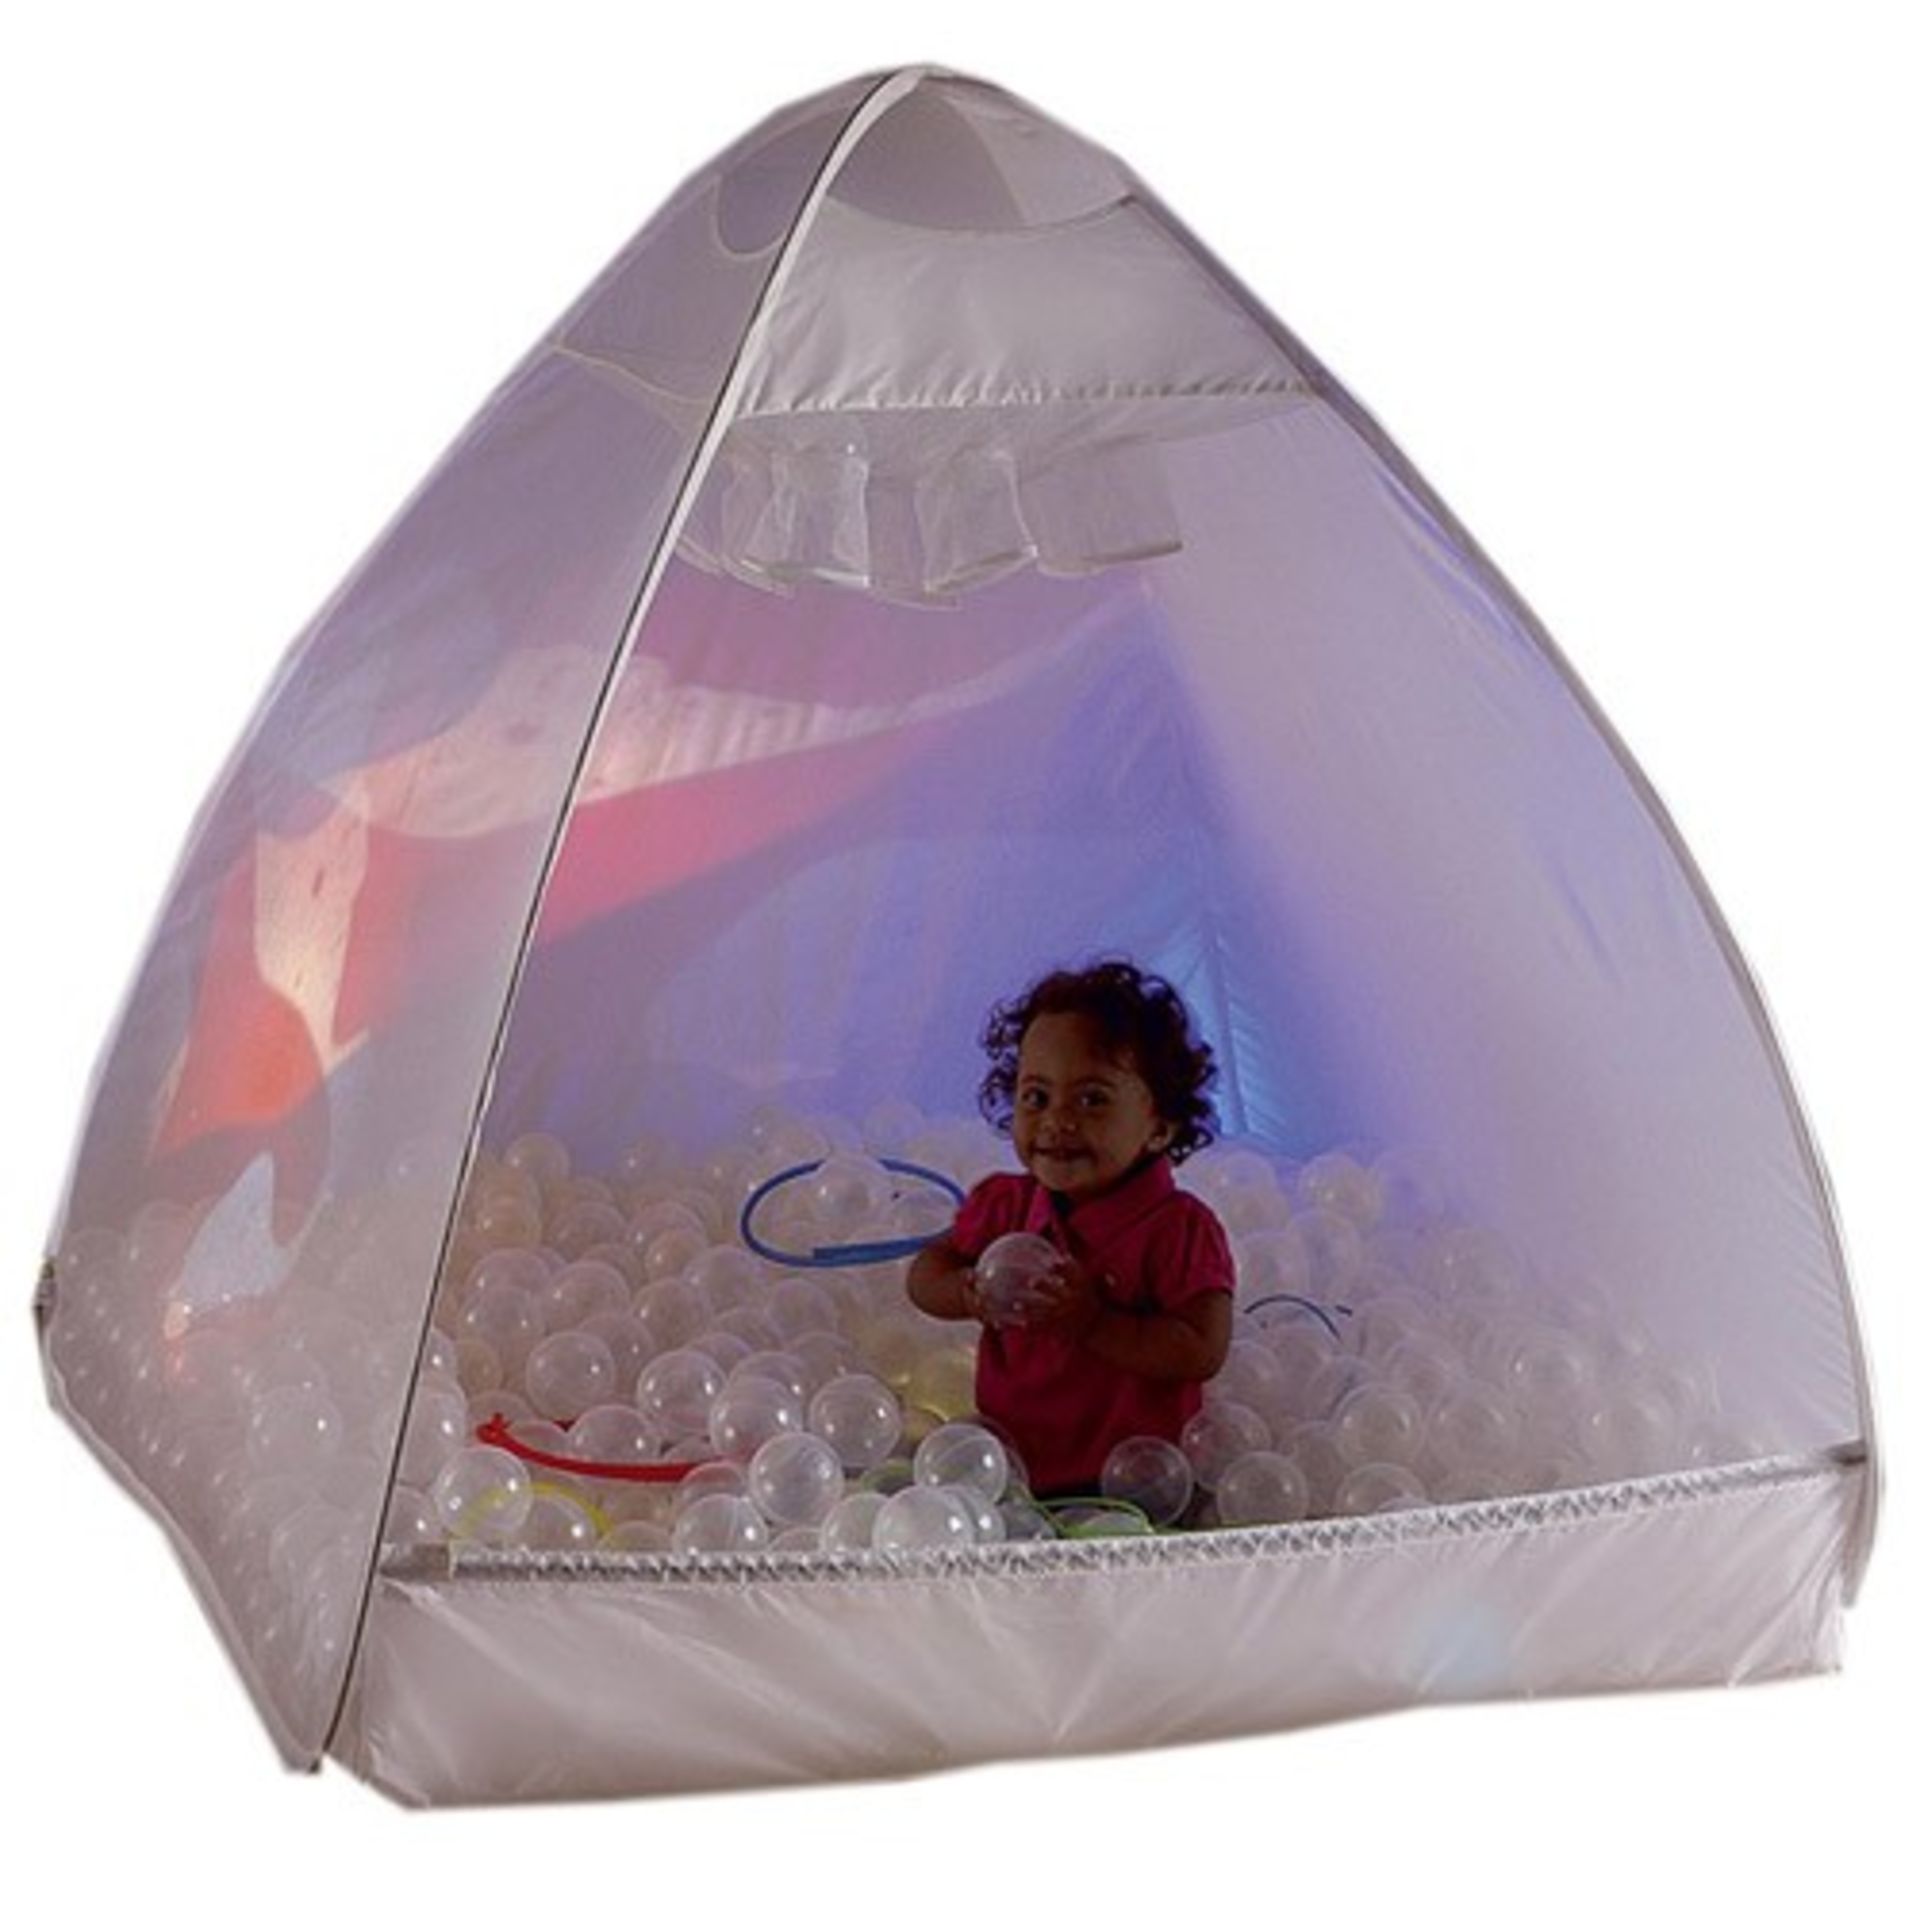 ME; 1 AS NEW BOXED SENSORY BALL HOUSE TENT / RRP £46.00 BALLS NOT INCLUDED (VIEWING HIGHLY